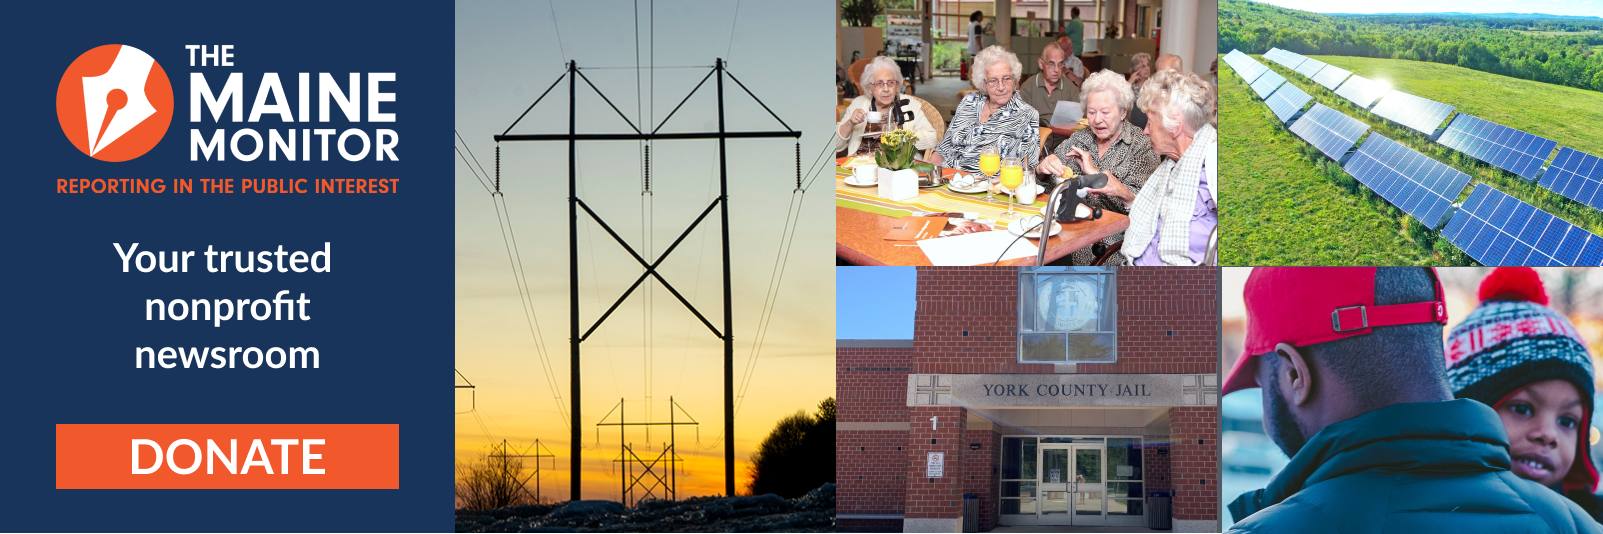 A banner encouraging people to donate to The Maine Monitor newsroom. The banner reads "Your trusted nonprofit newsroom" and includes an orange donate button. Five images are embedded within the graphic showing electrical transmission lines, a group of elderly women sitting at a breakfast table, the exterior of the York County Jail, two rows of solar panels in a grass field and a black man carrying his young black daughter